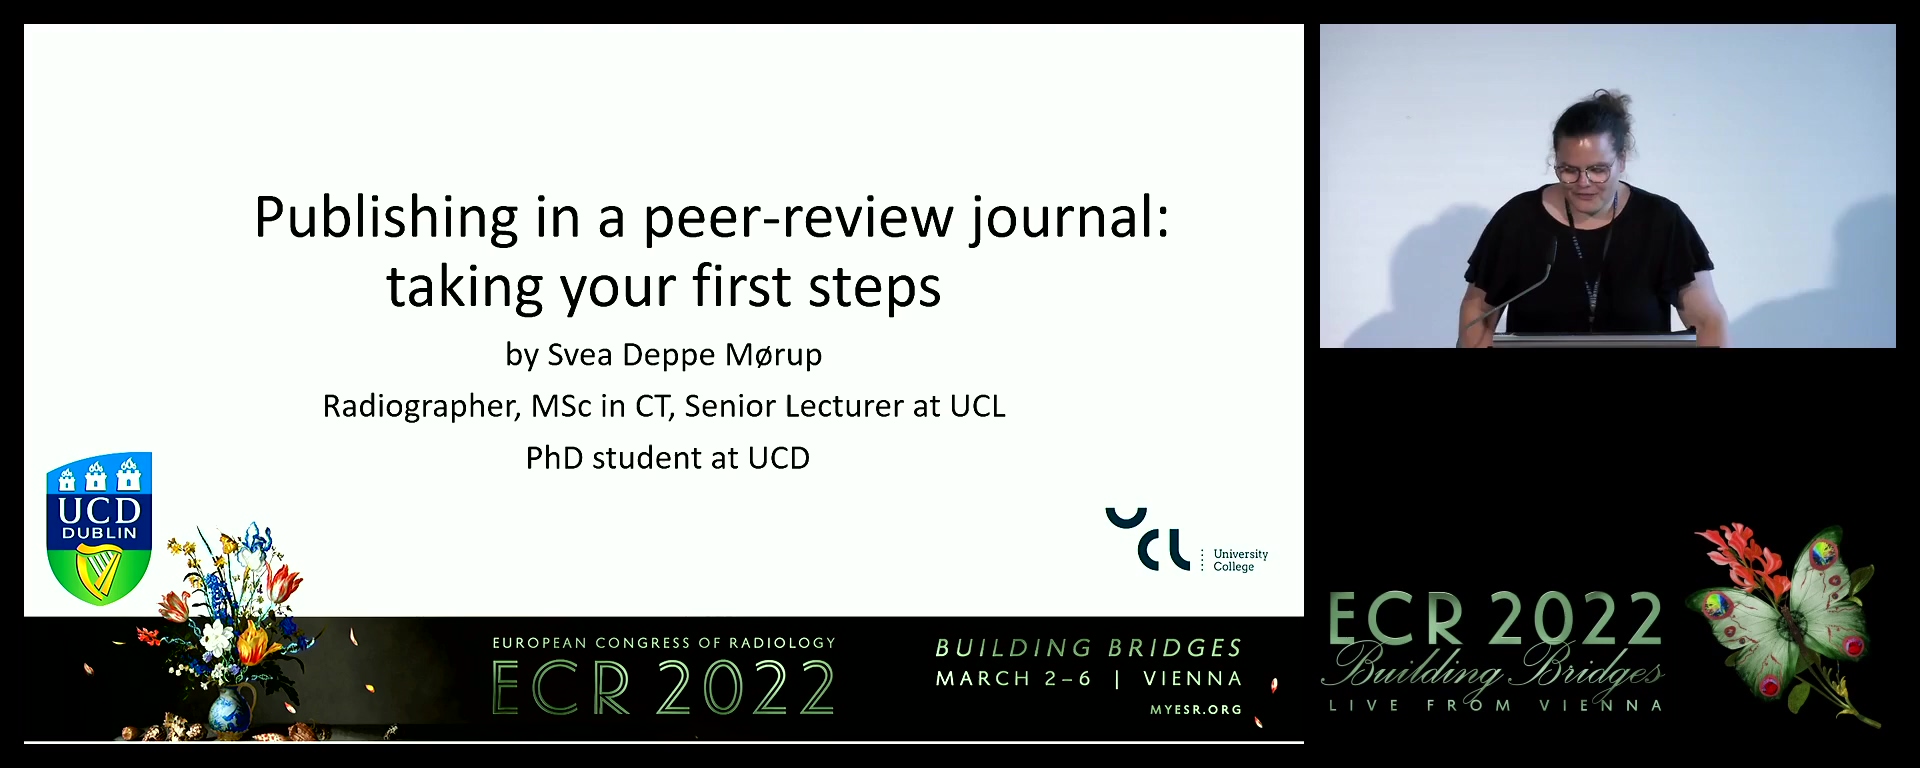 Publishing in a peer-review journal: taking your first steps - Svea Deppe Mørup, Odense / DK